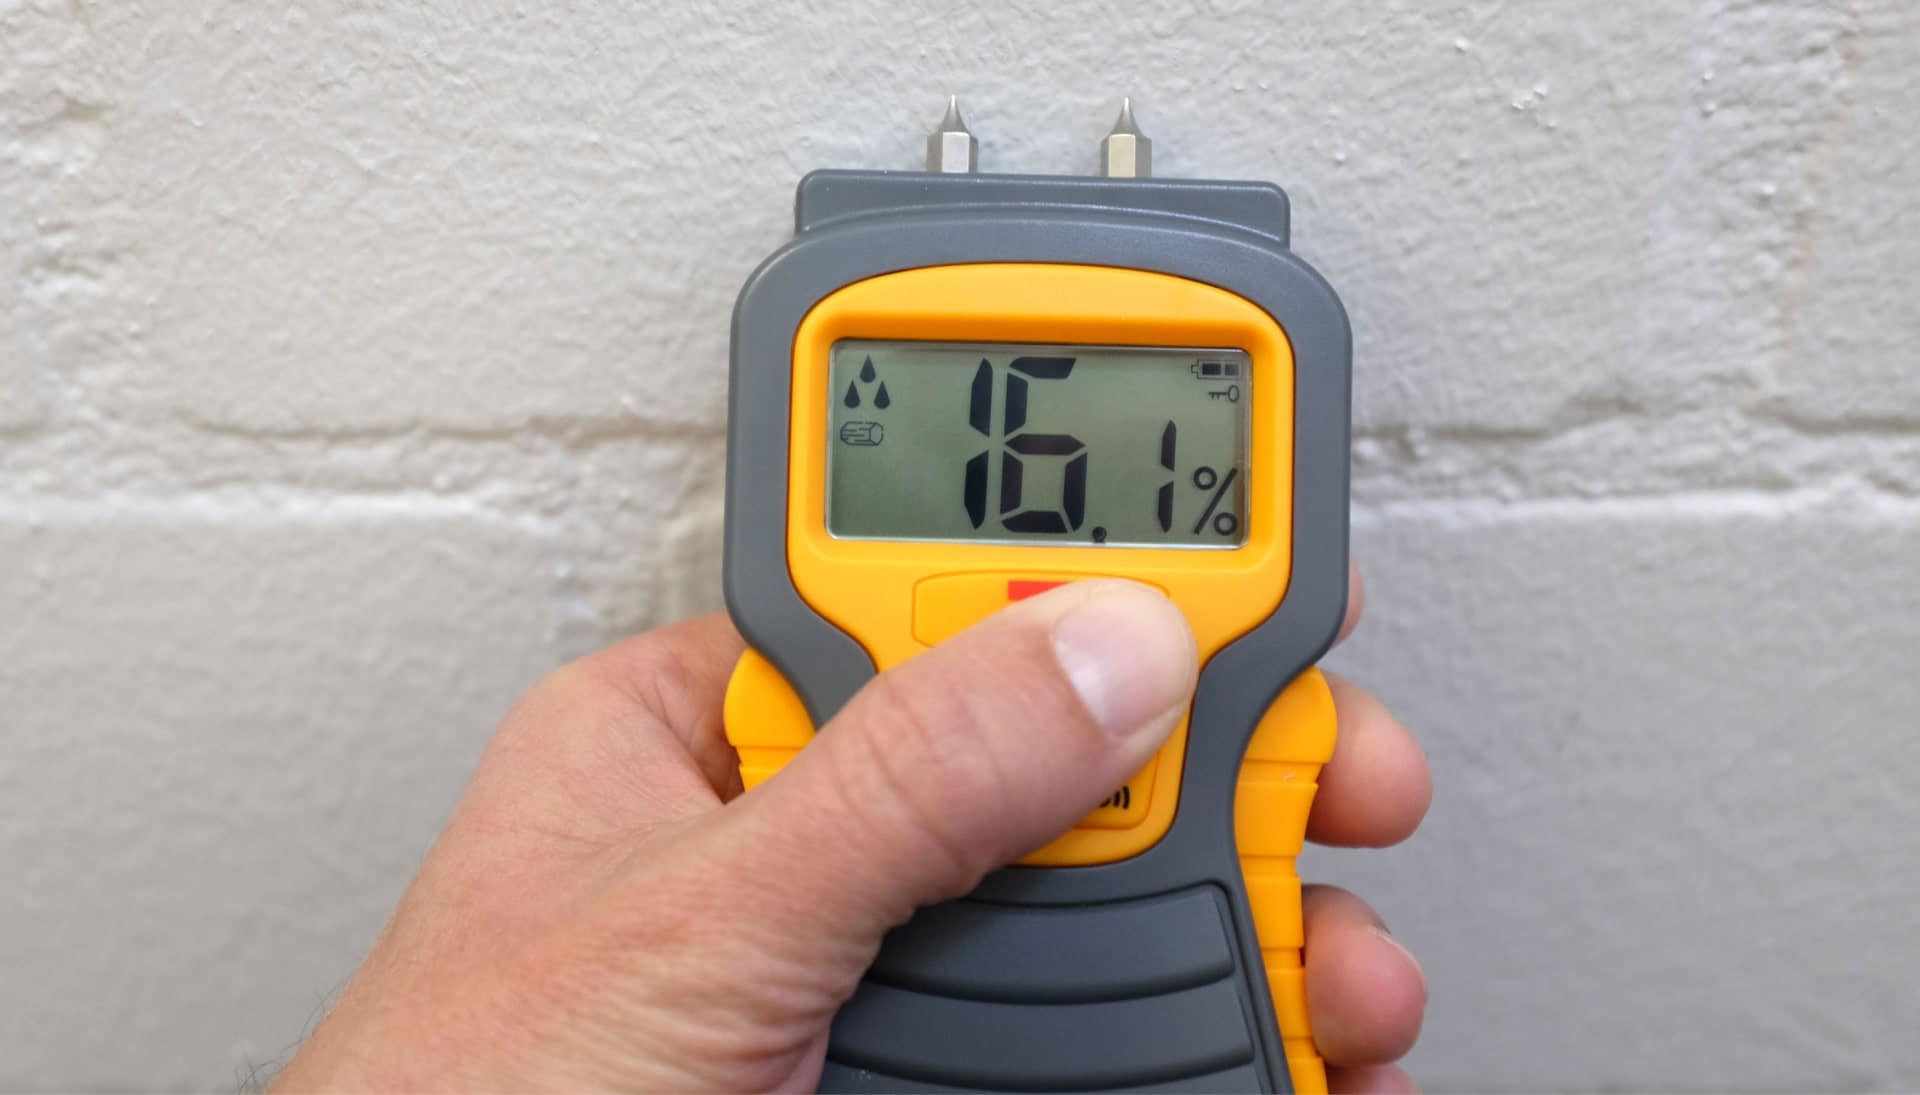 We provide fast, accurate, and affordable mold testing services in Chesterfield, Virginia.